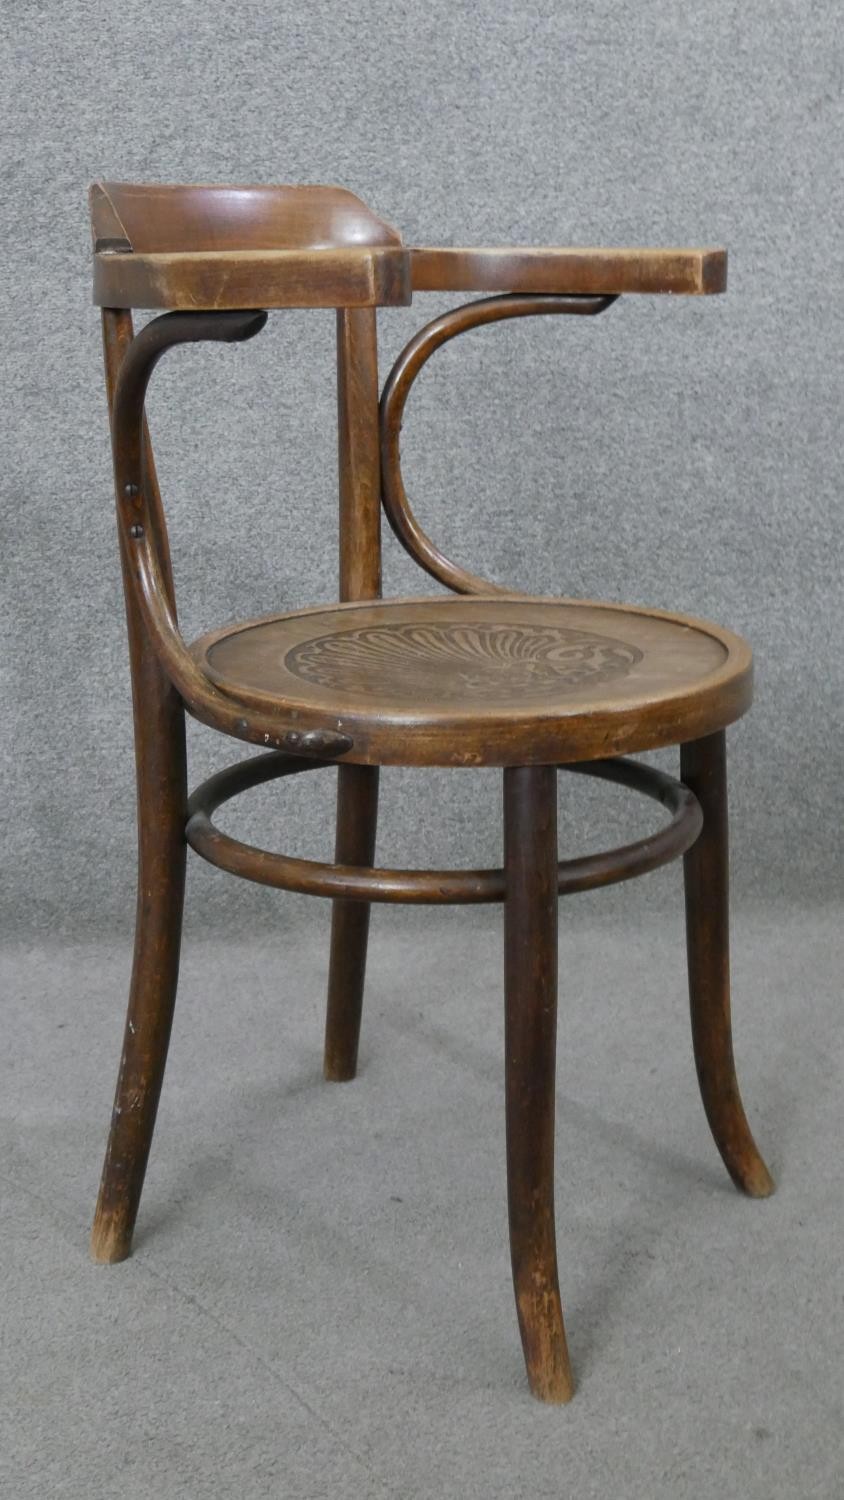 A set of three bentwood armchairs with floral embossed panel seats. - Image 7 of 7